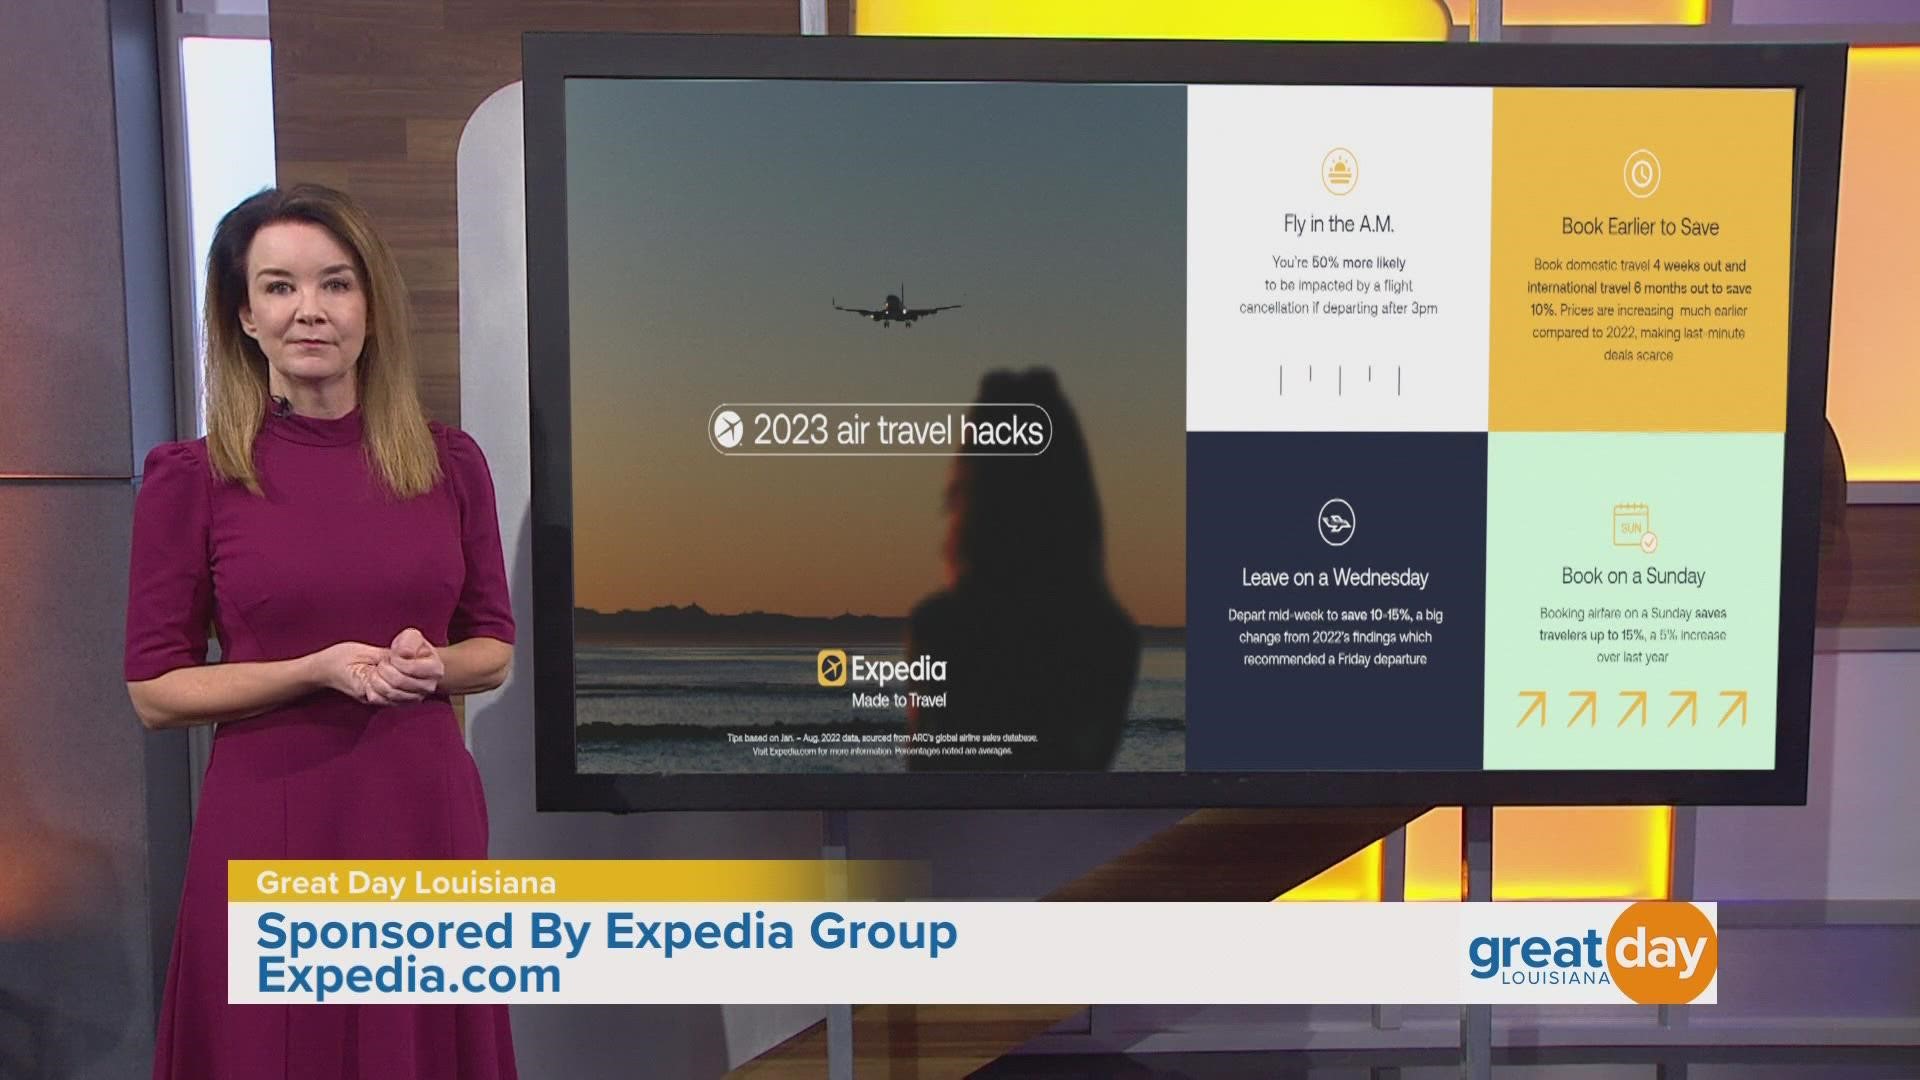 Travel expert Melanie Fish reveals the results of Expedia's 2023 air travel hacks report.